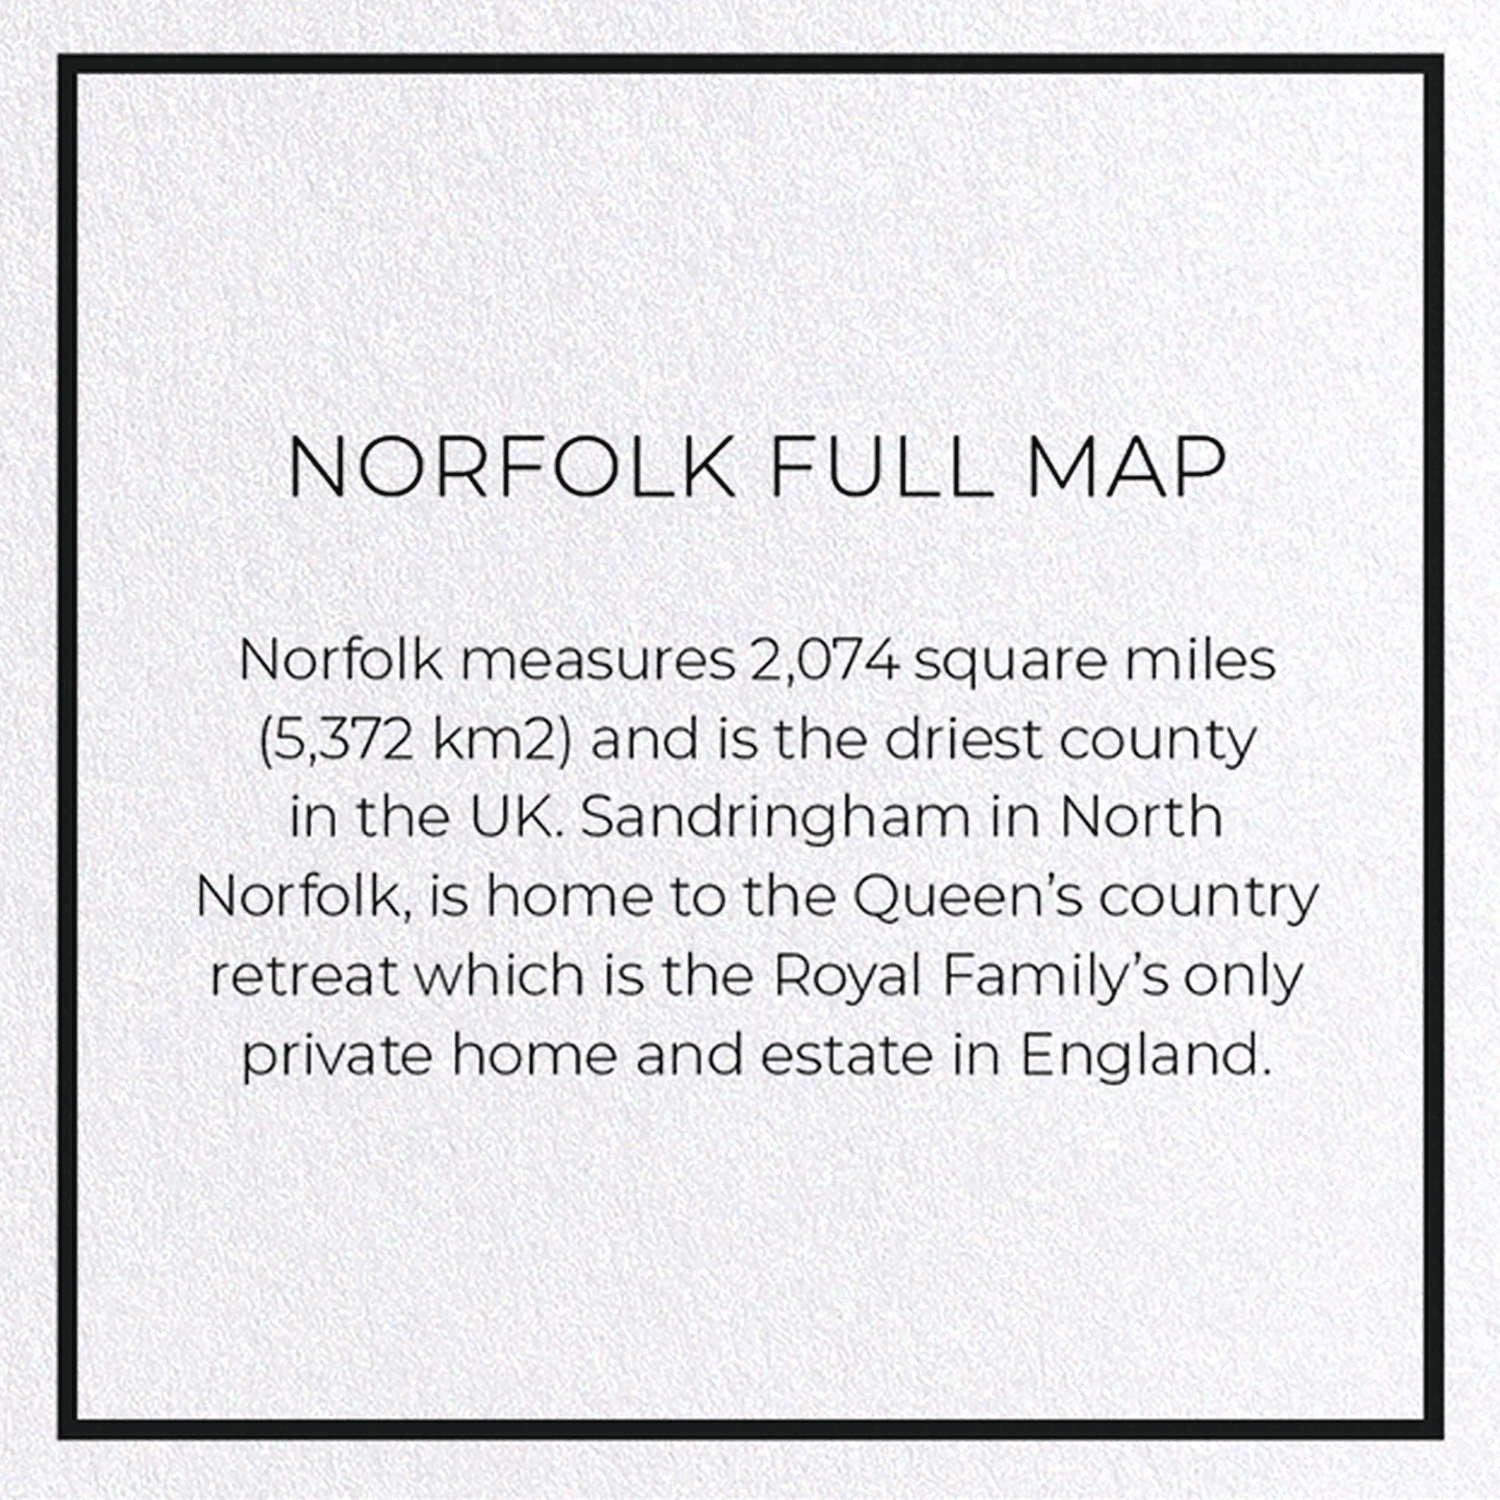 NORFOLK FULL MAP: 8xCards